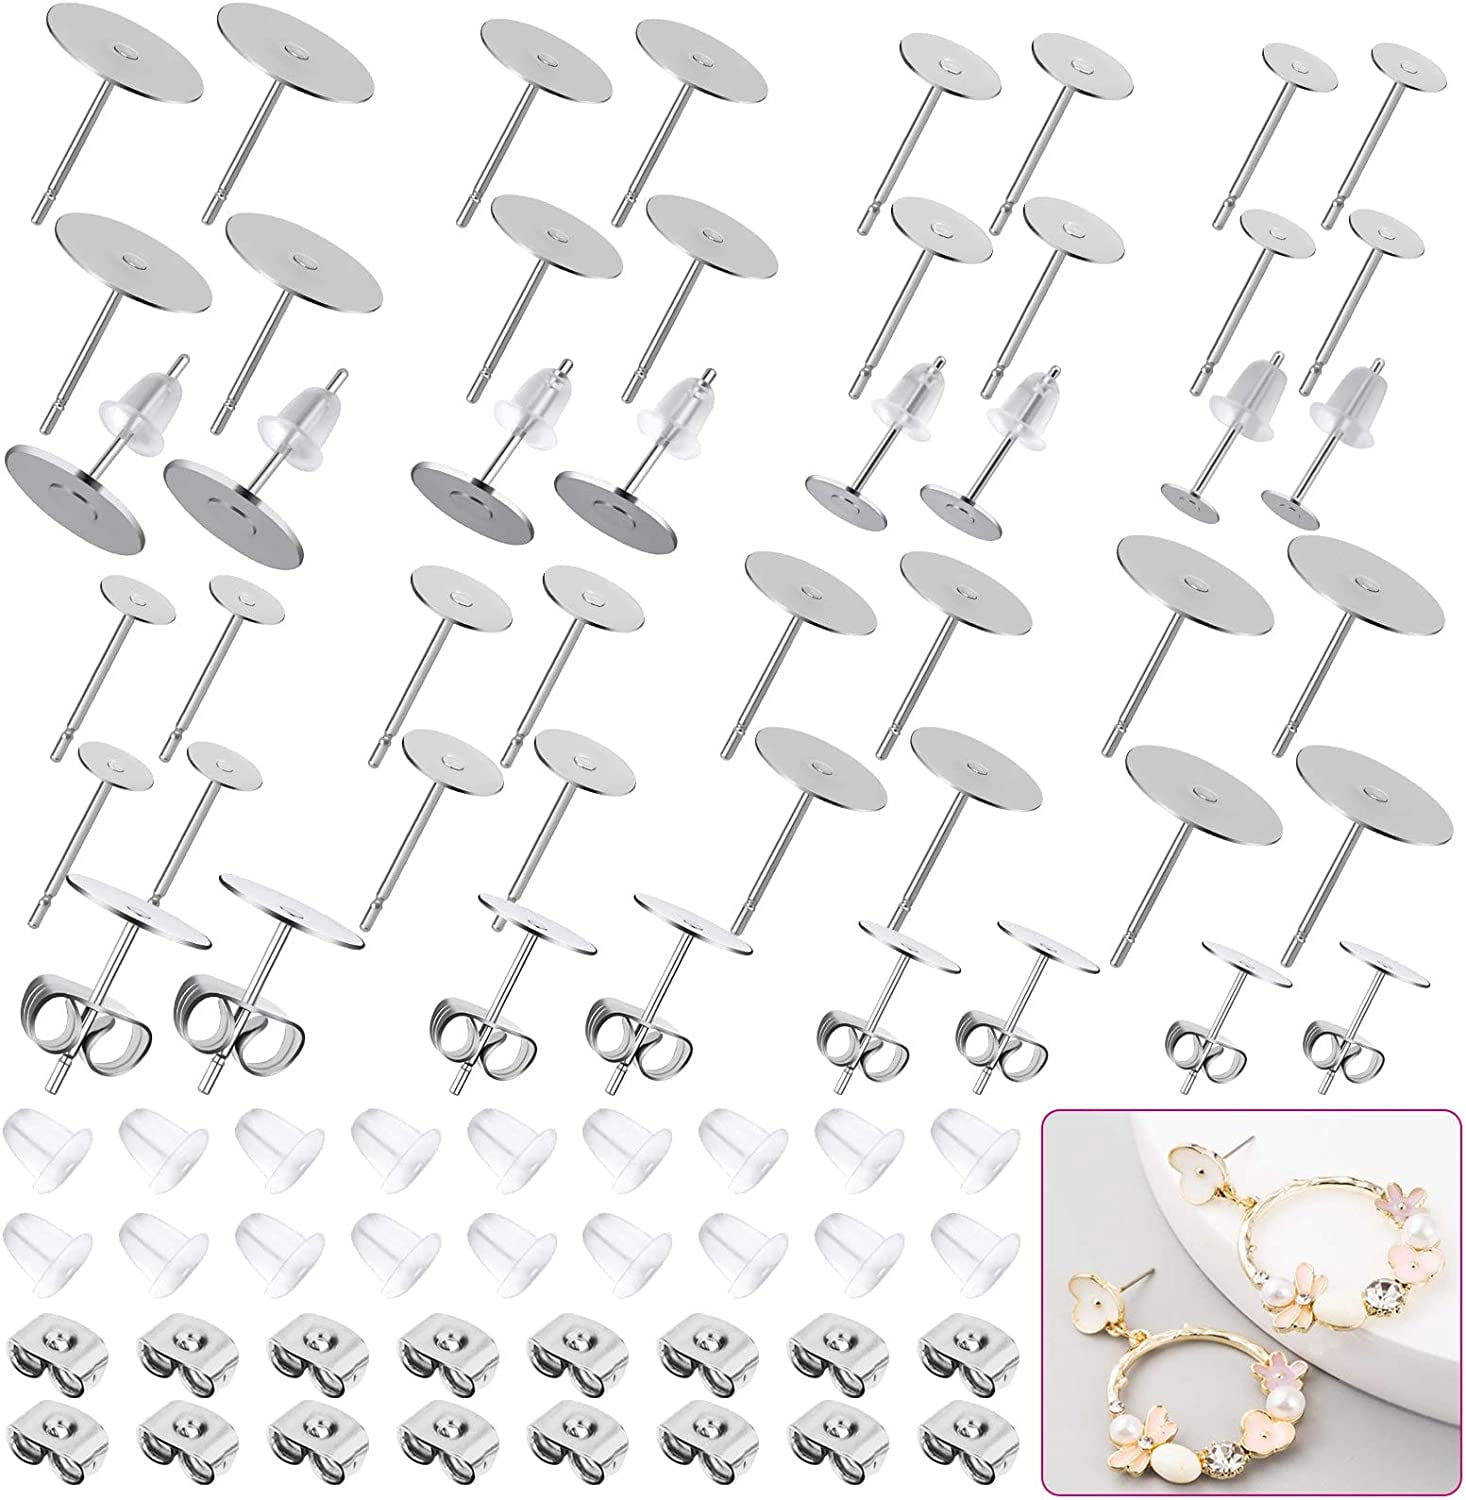 100-300Pcs Soft Silicone Rubber Earring Back Stoppers for Stud